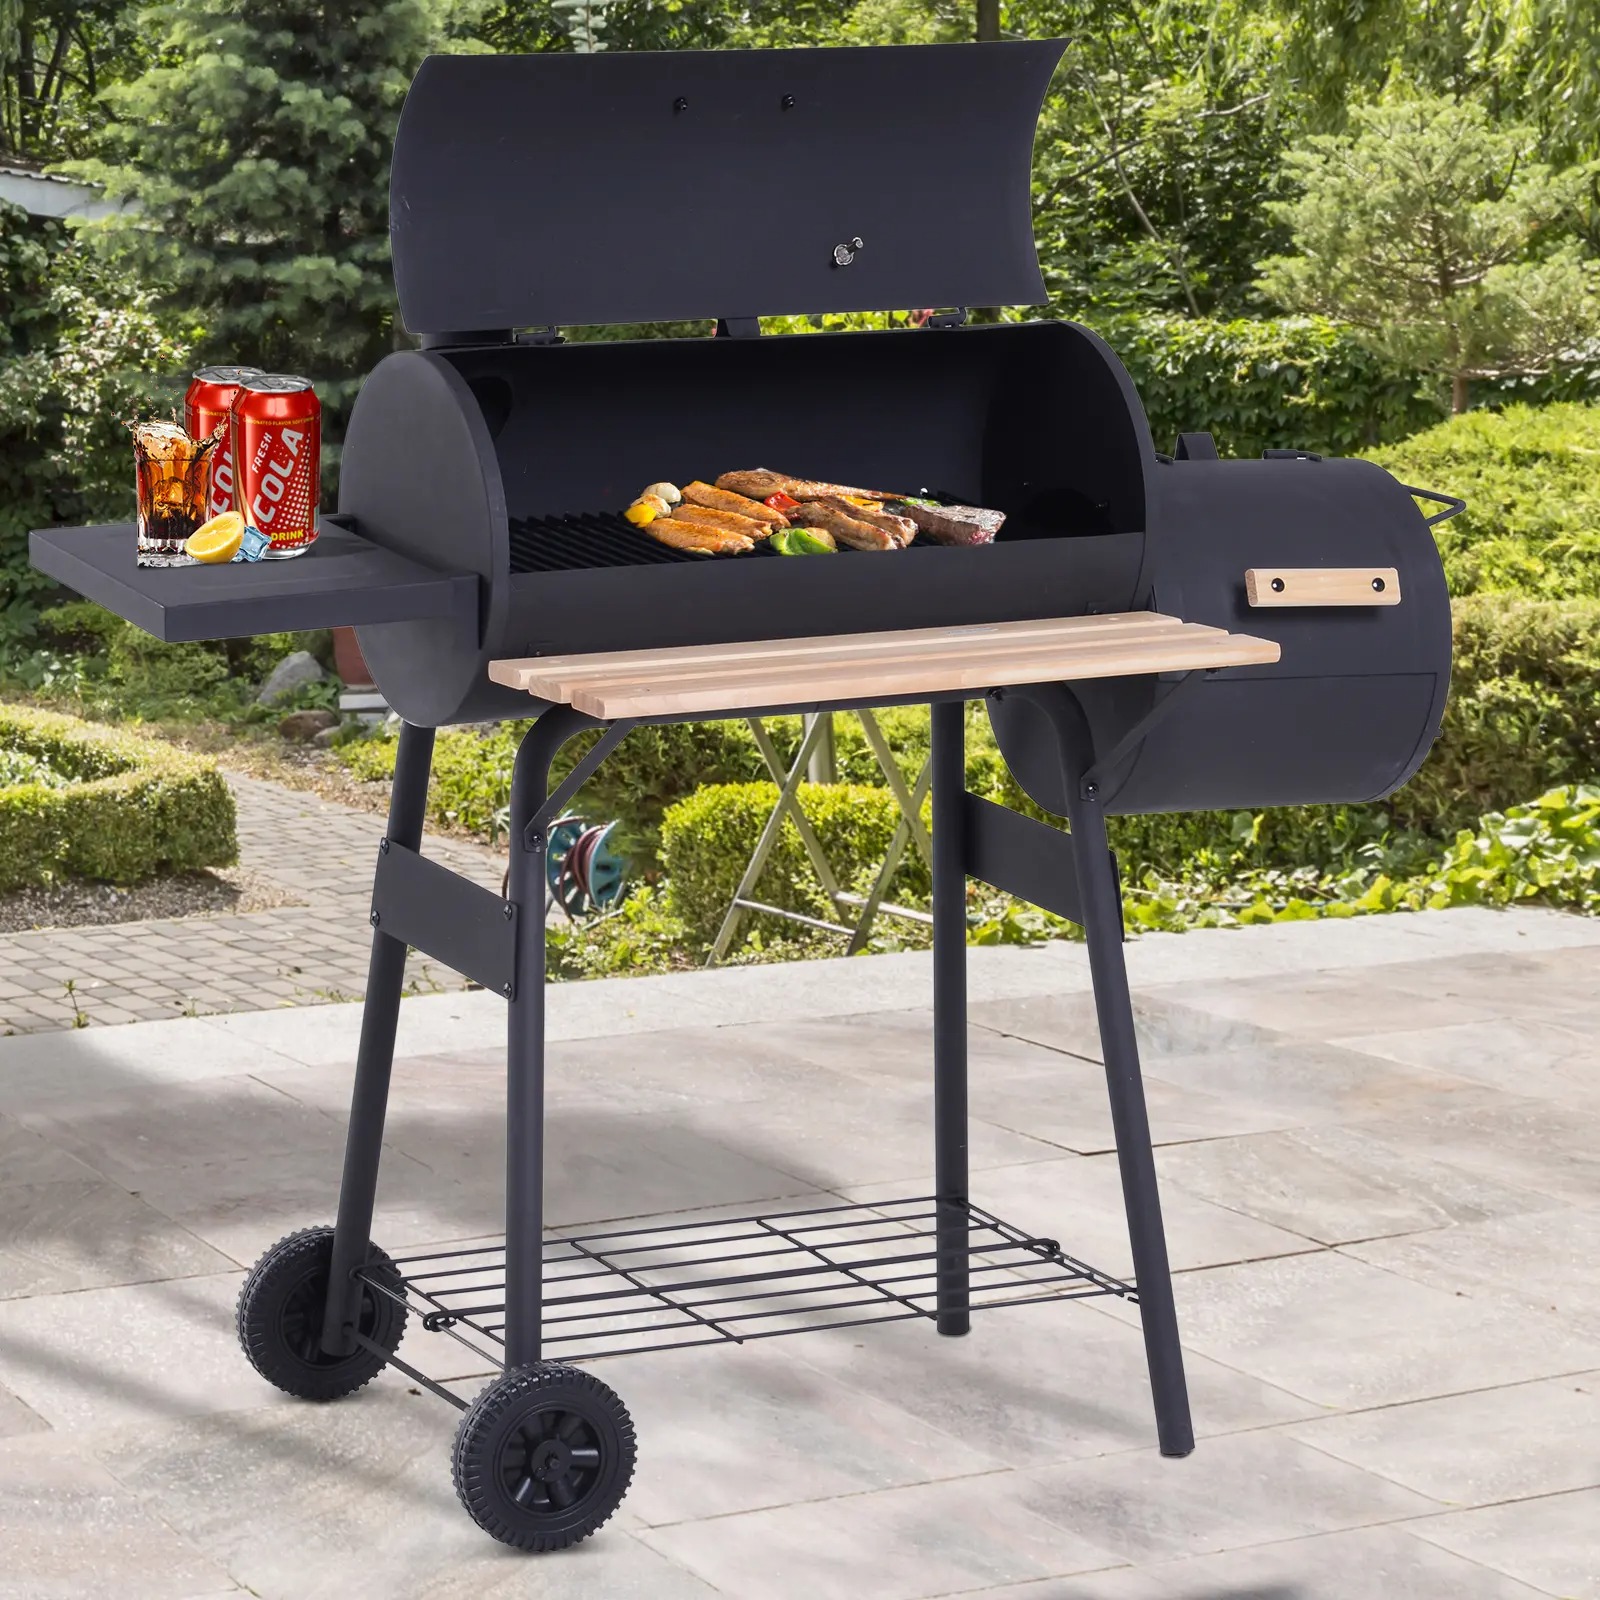 37.5" Steel Square Portable Outdoor Backyard Charcoal Barbecue Grill with Lower Shelf and Tray